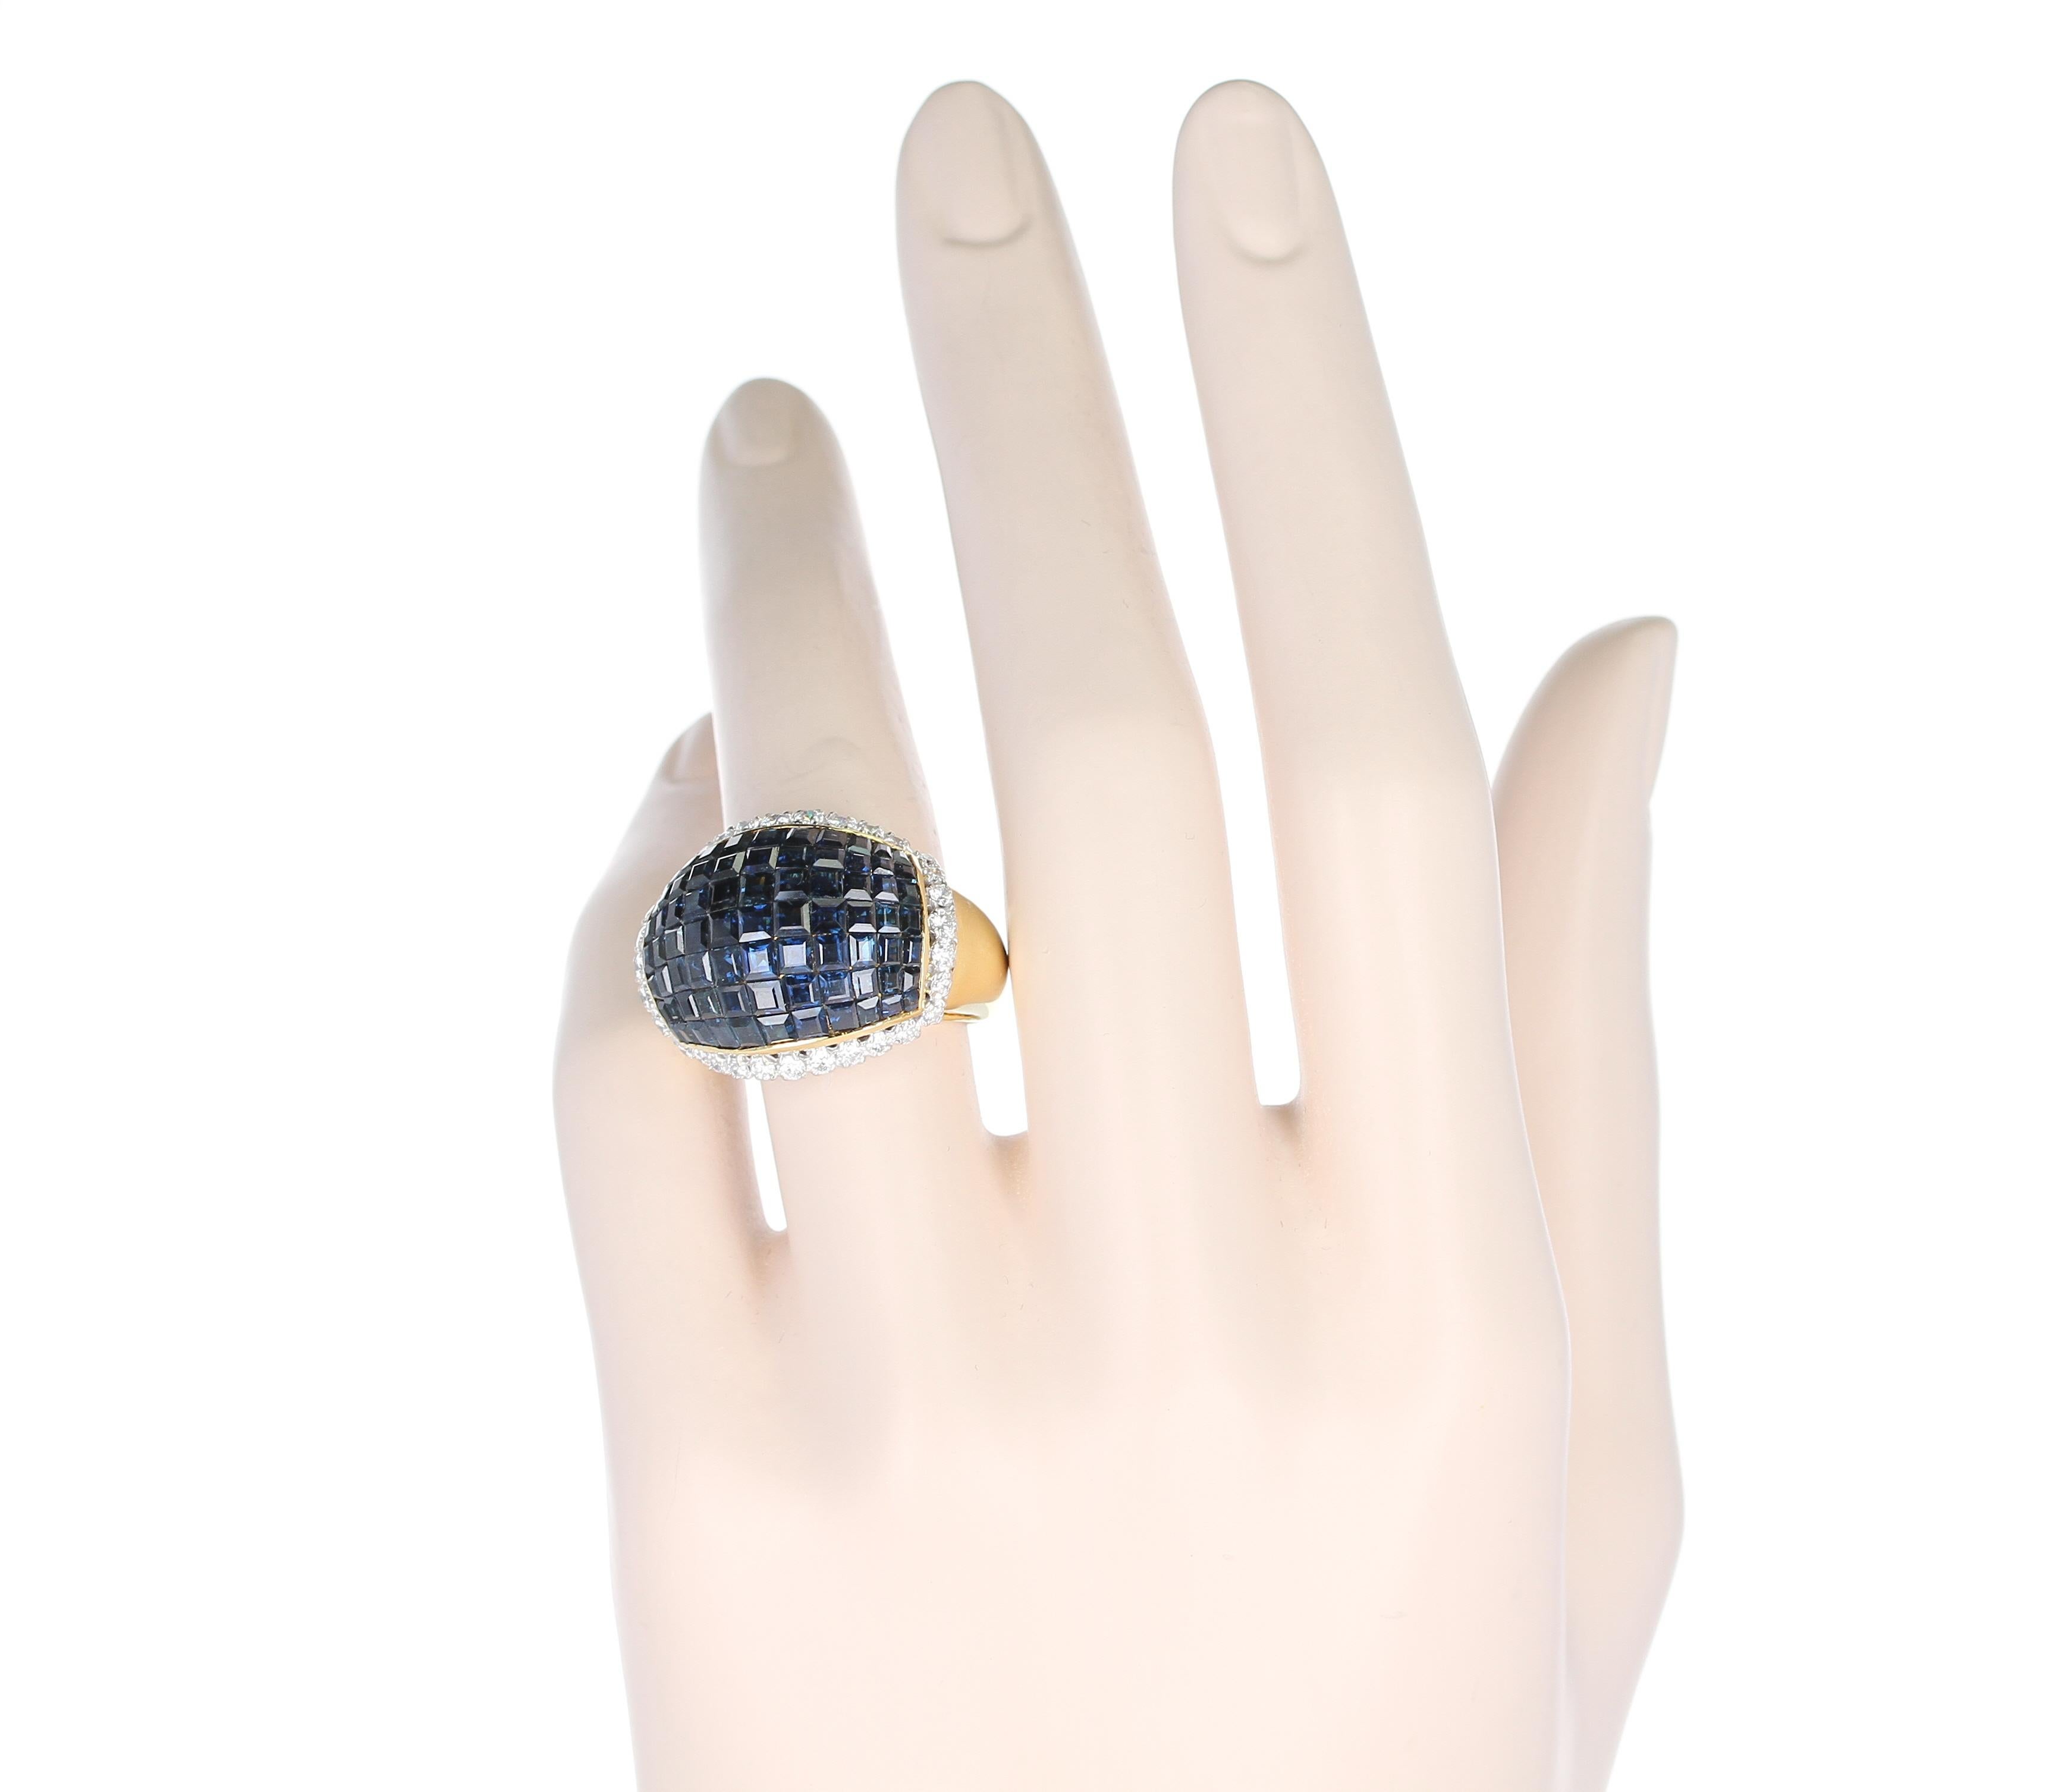 A Mystery Set Blue Sapphire and Diamond Bombe Ring in 18K Yellow Gold. 
Ring Size US 9. 
Total Weight: 16.64 grams.